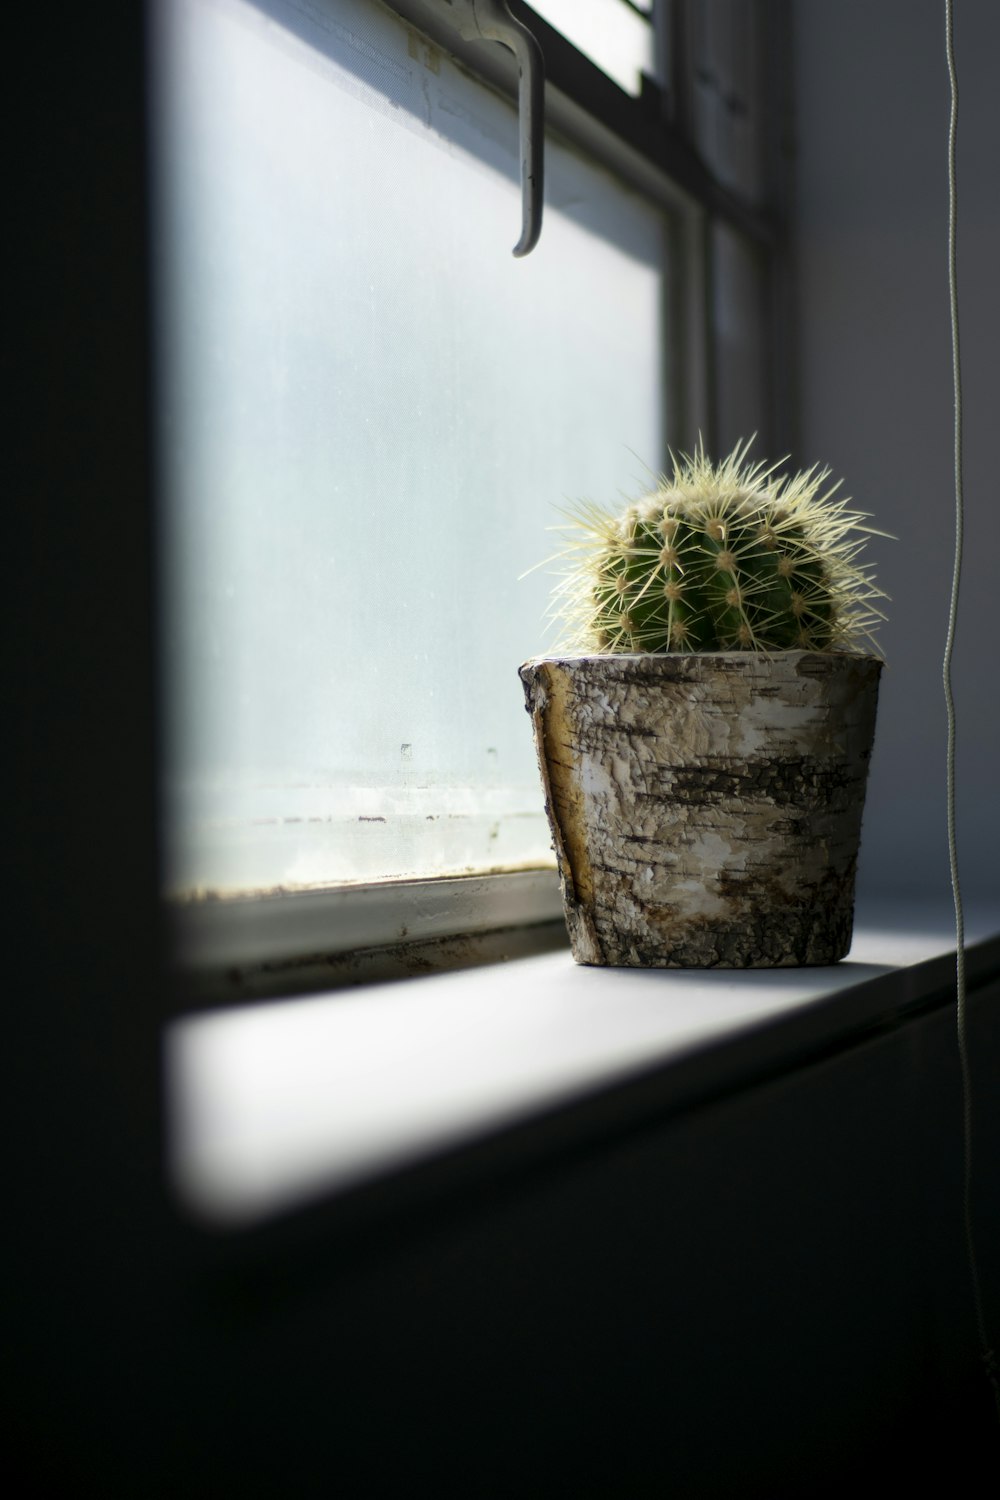 green ball cactus in wooden pot by window